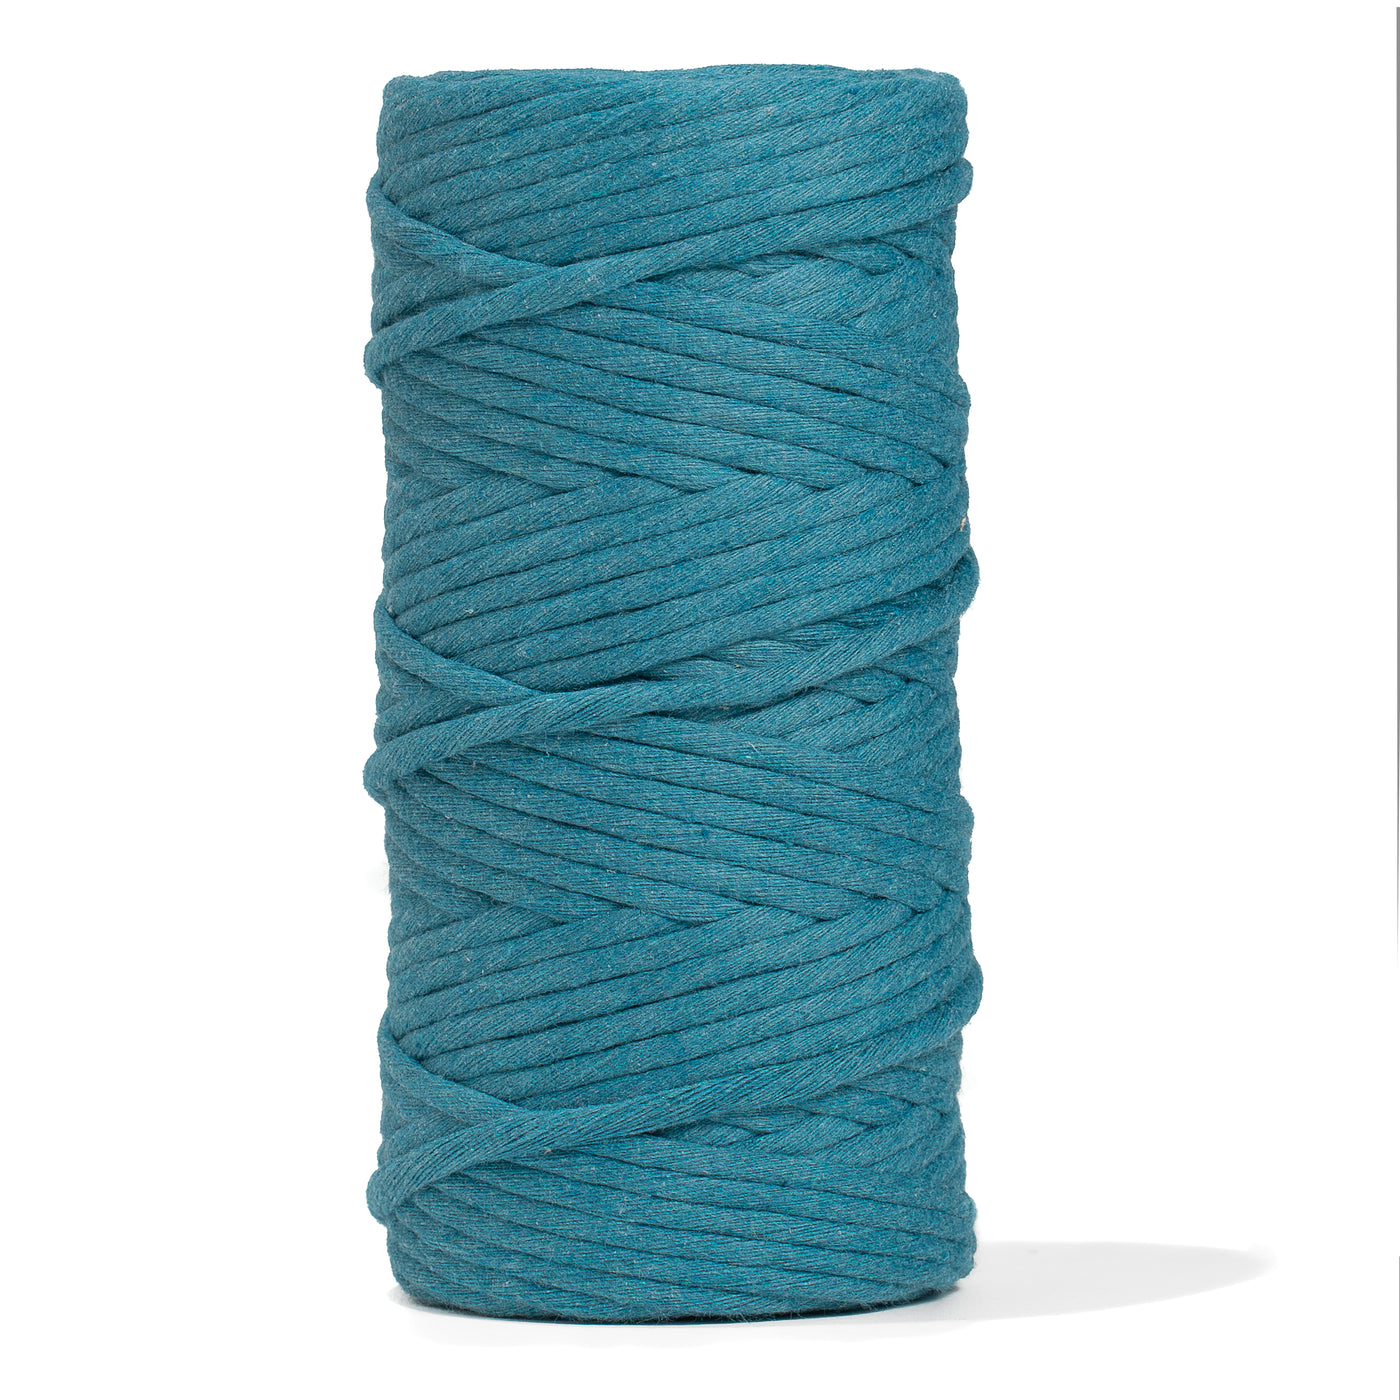 SOFT COTTON CORD ZERO WASTE 4 MM - 1 SINGLE STRAND - OCEAN TEAL COLOR